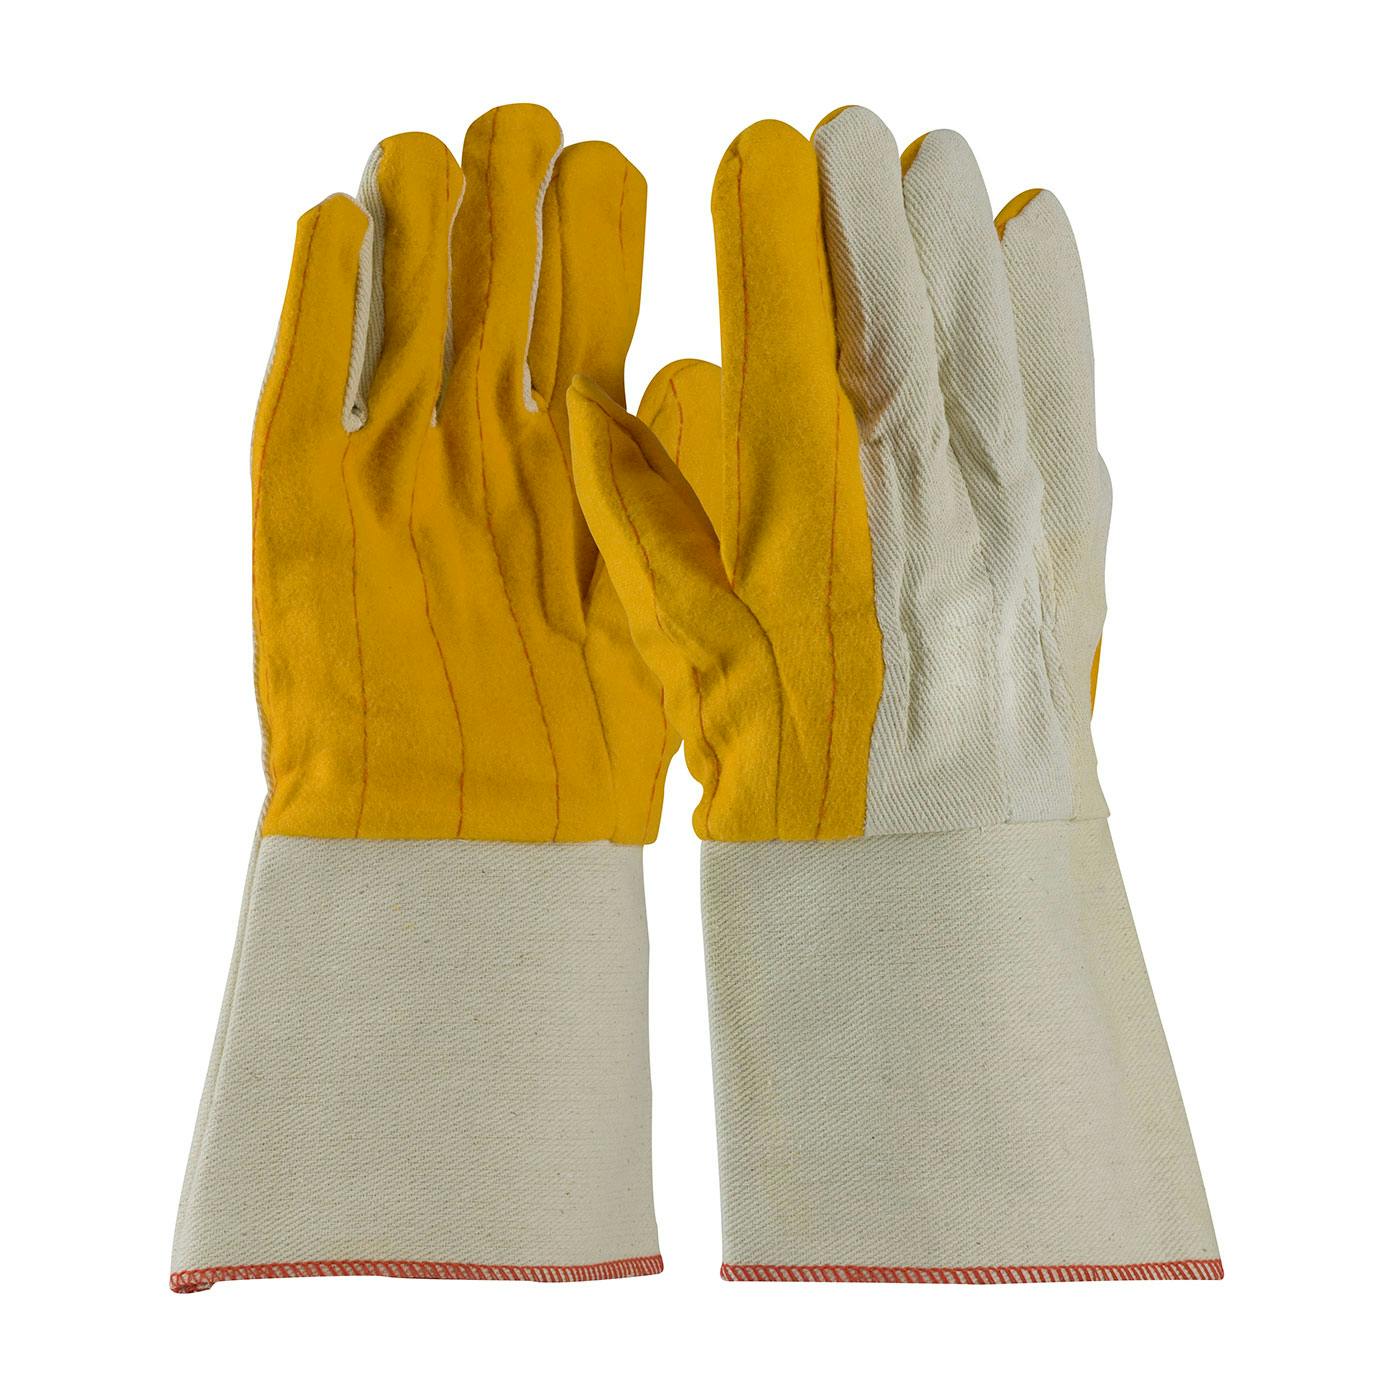 Cotton Chore Glove with Double Layer Palm, Canvas Back and Nap-out Finish - Rubberized Gauntlet Cuff, Natural (M18G) - L